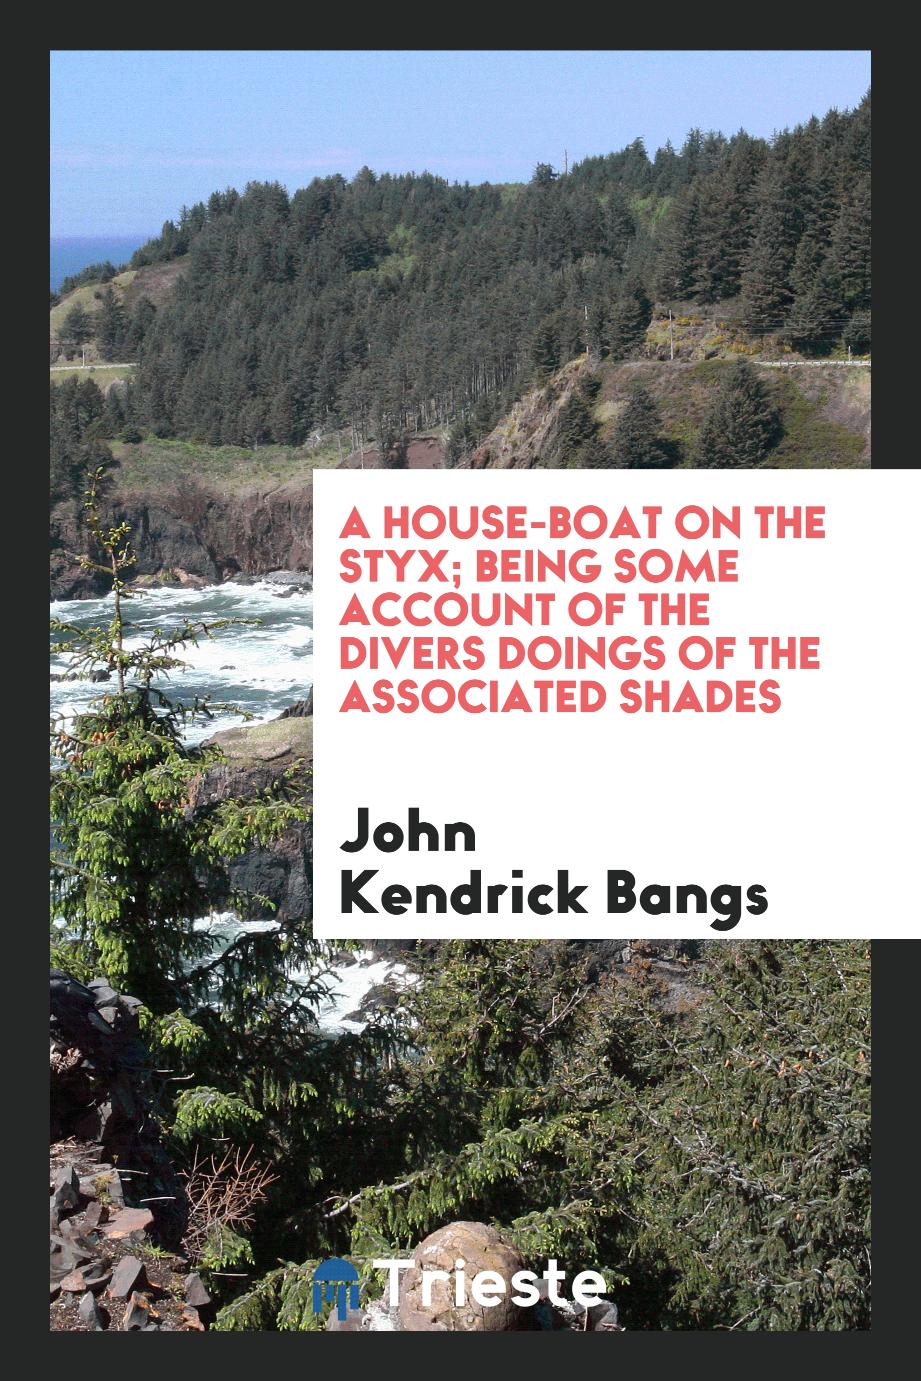 John Kendrick Bangs - A house-boat on the Styx; being some account of the divers doings of the associated shades